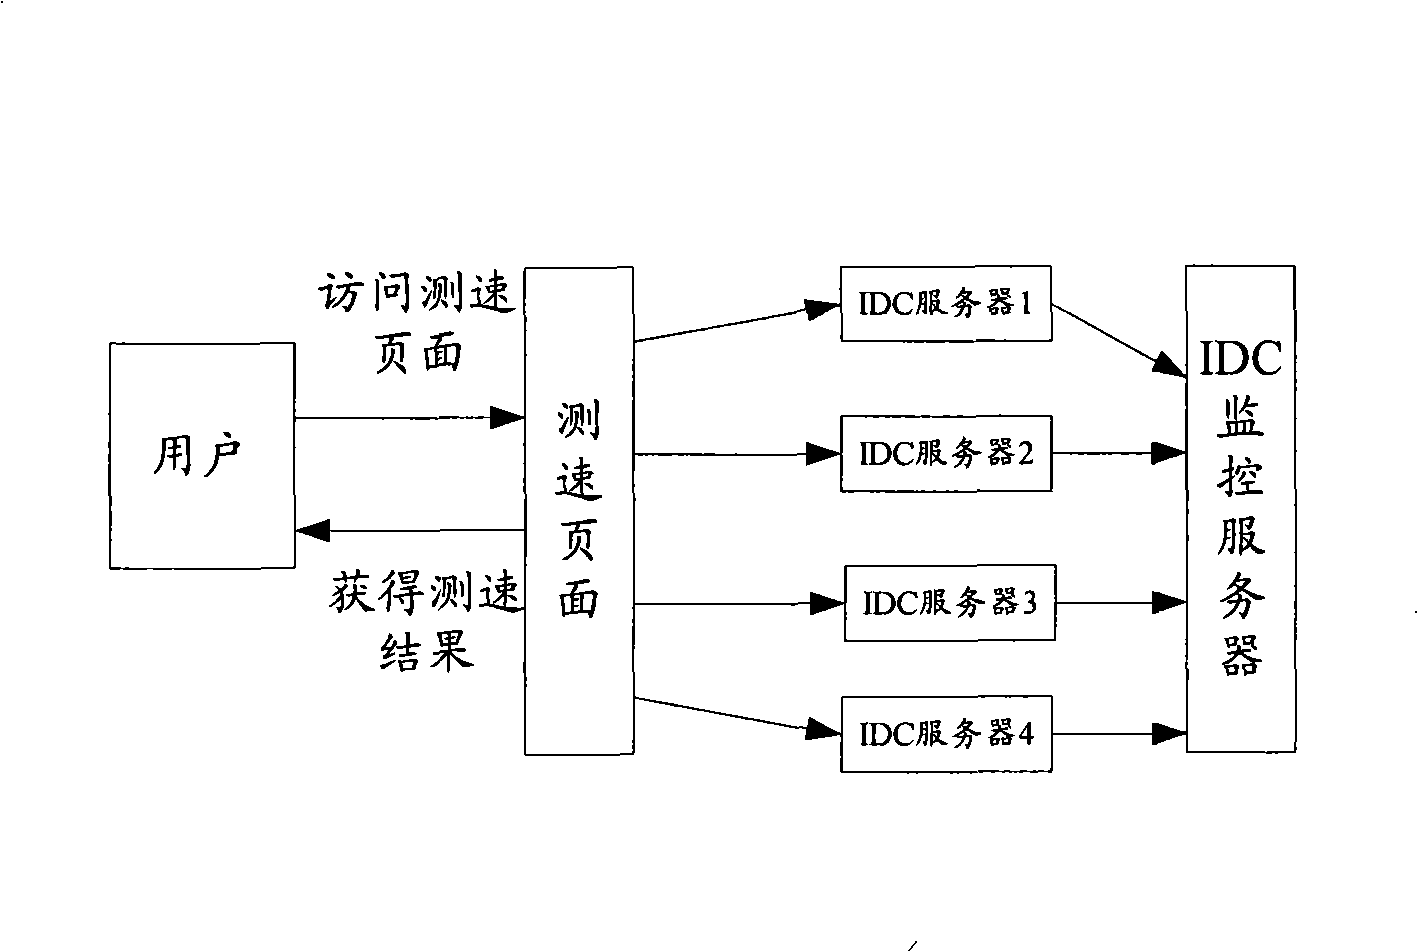 Network quality monitoring method and system of internet data center